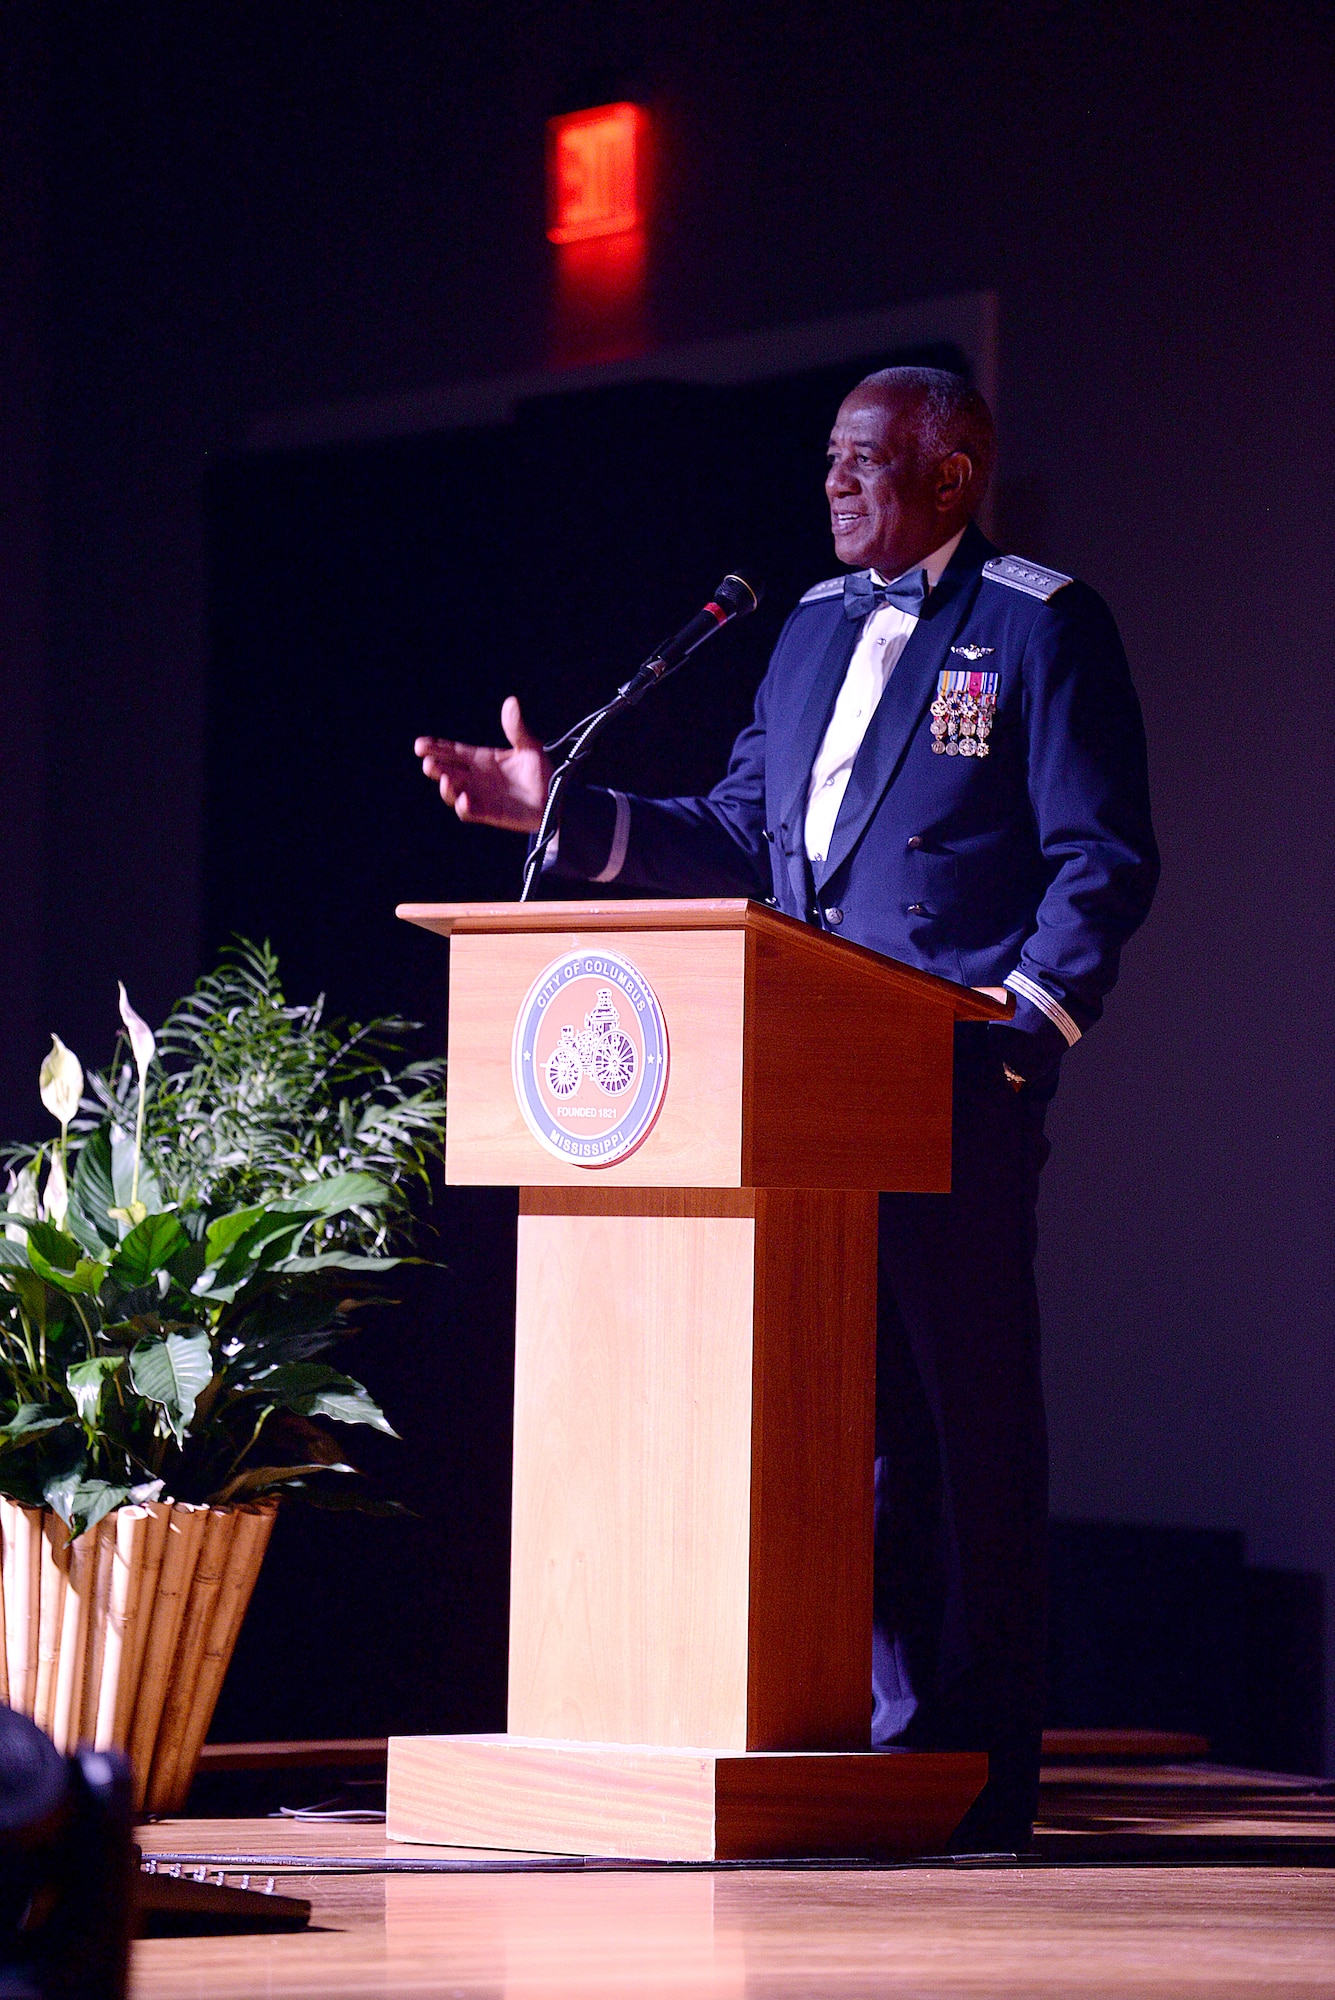 Retired Gen. Lloyd “Fig” Newton, a prior Thunderbird, former Air Education and Training Command commander and Vietnam War veteran speaks during the 14th Flying Training Wing’s Air Force Birthday Ball Sept. 28, 2019, in Columbus, Miss. The U.S. Air Force Band of the West also were guests for the event, playing music and bringing the event together to sing the Air Force song at the end of the night. (U.S. Air Force photo by Senior Airman Keith Holcomb)